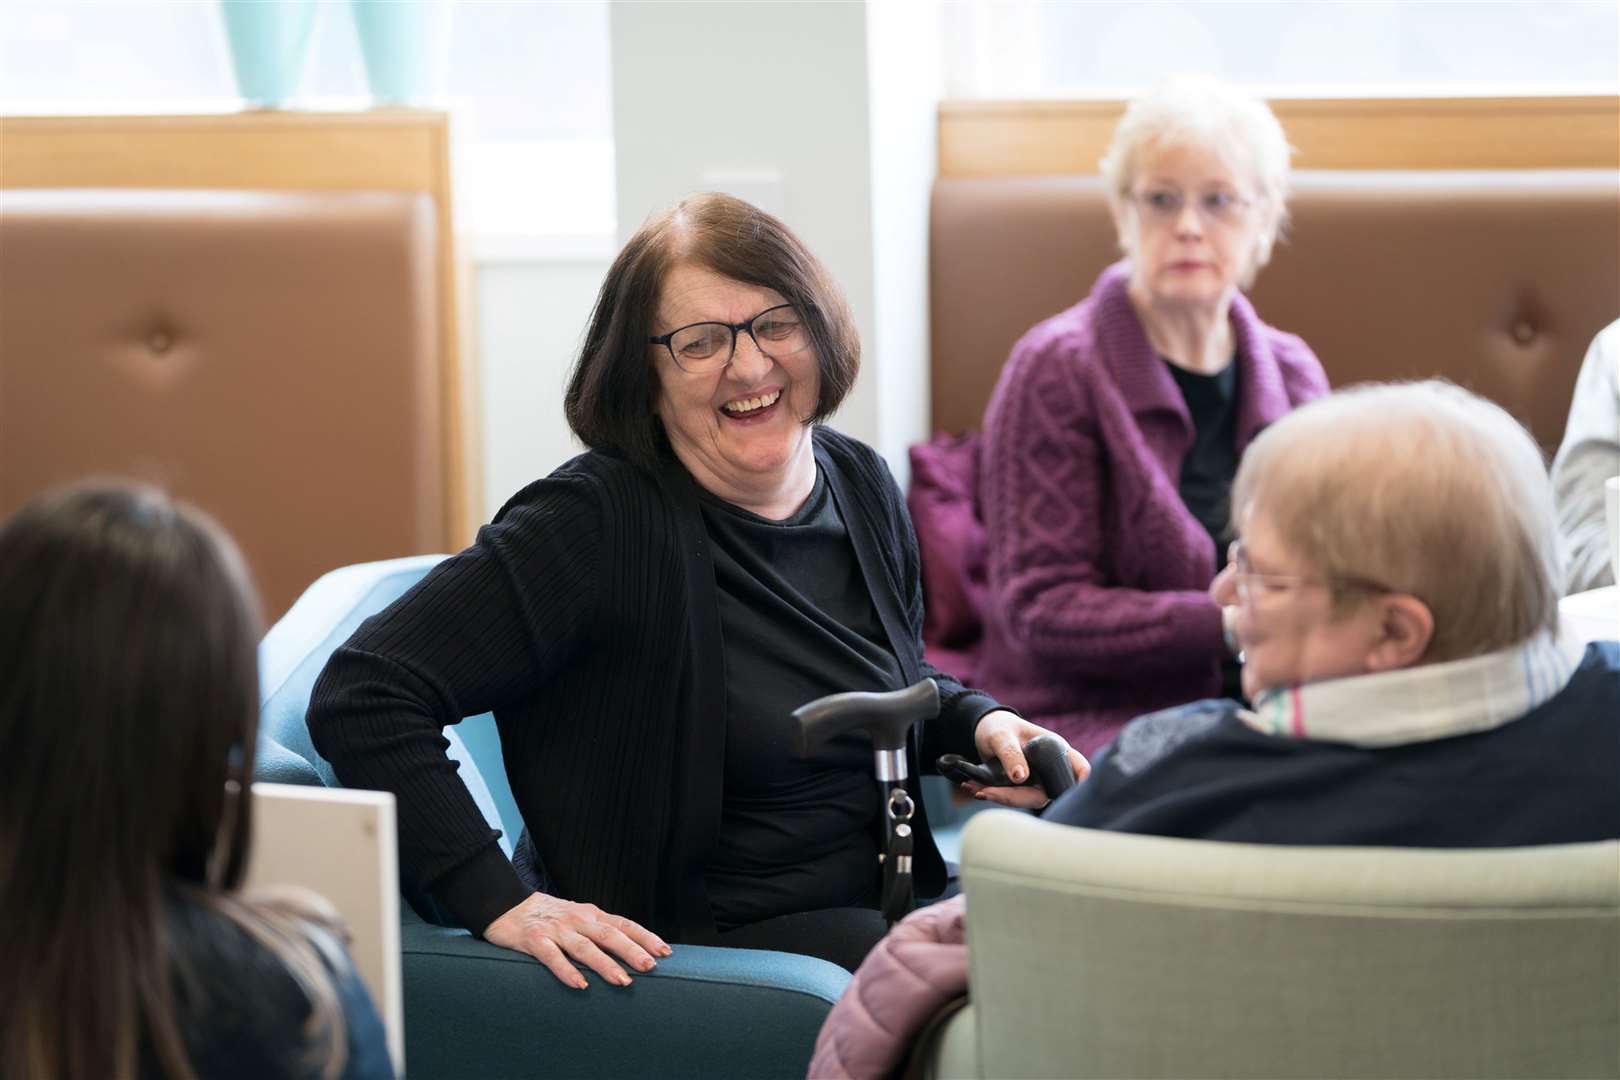 The scheme aims to support people living with dementia